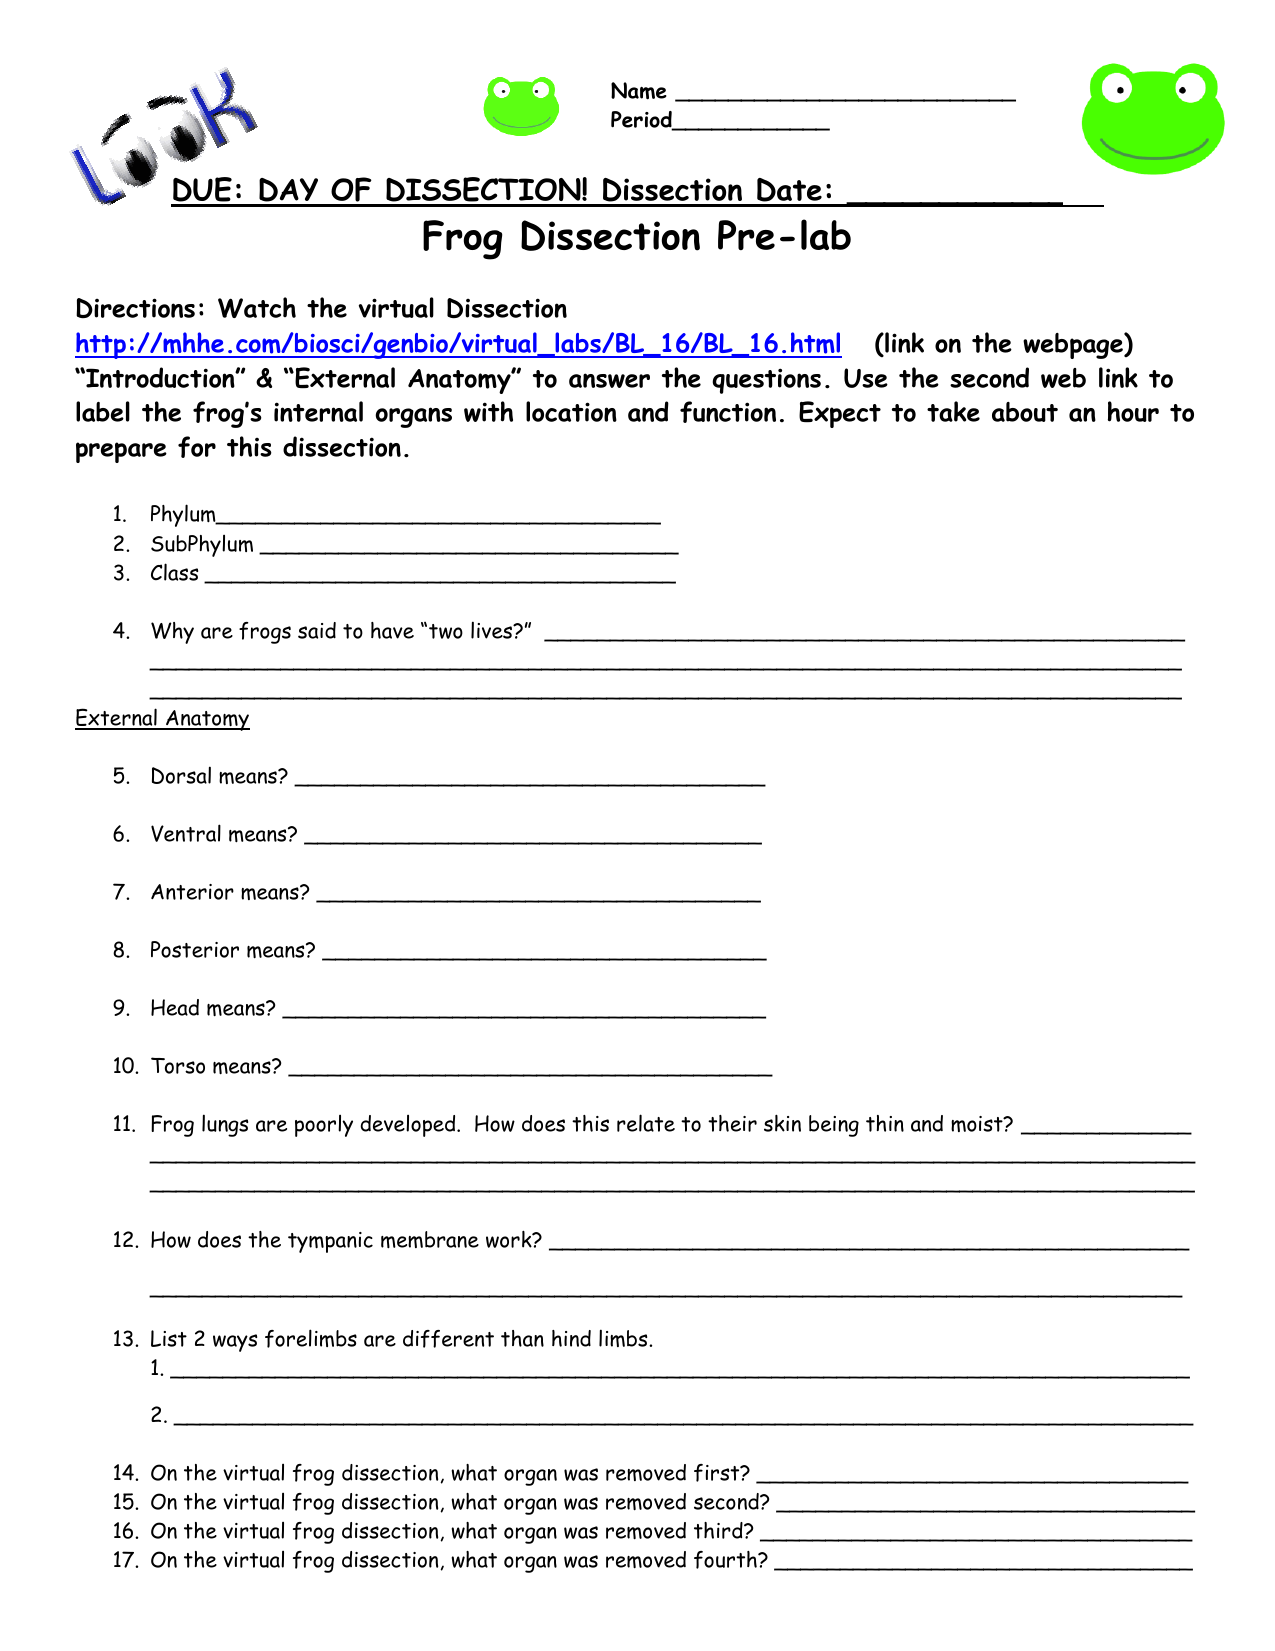 Frog Dissection Worksheet With Frog Dissection Worksheet Answer Key